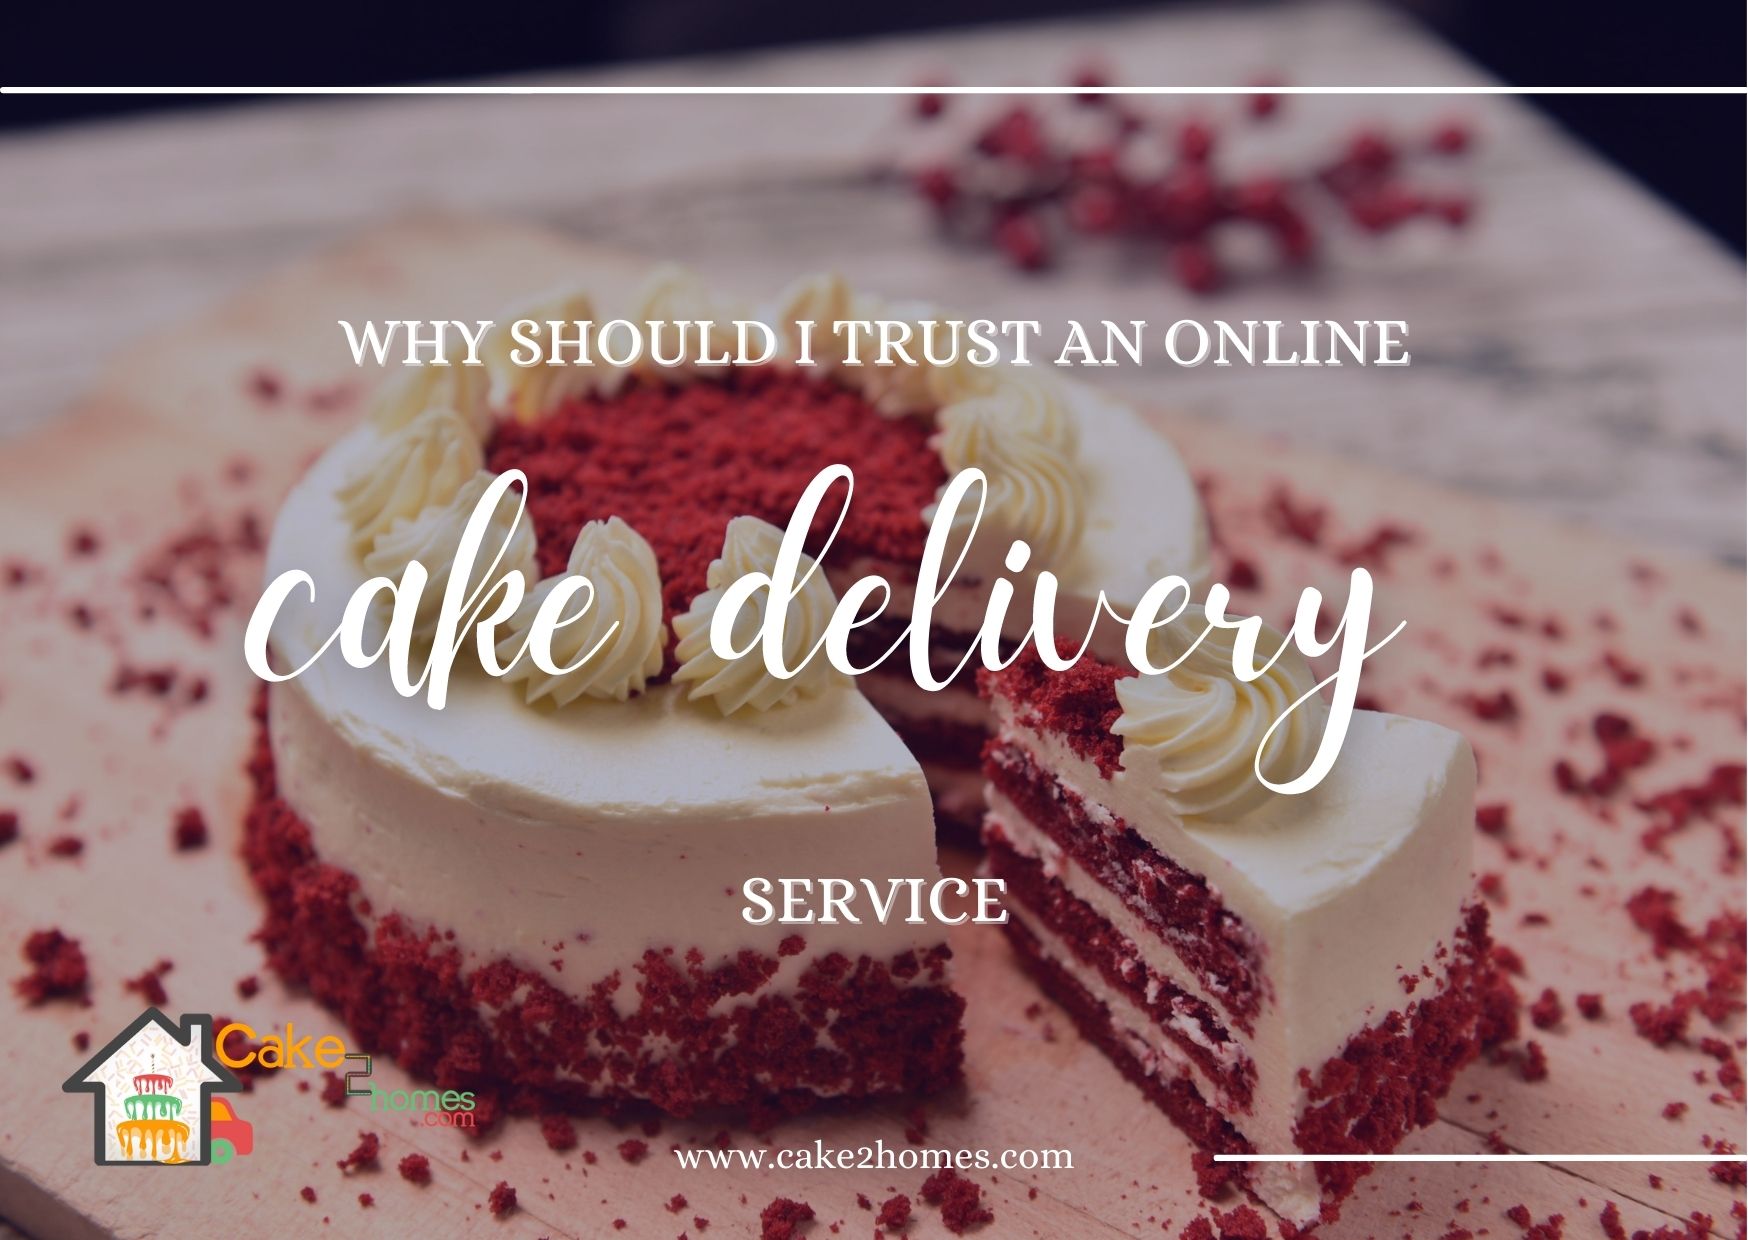 Why should I trust an online cake delivery service?